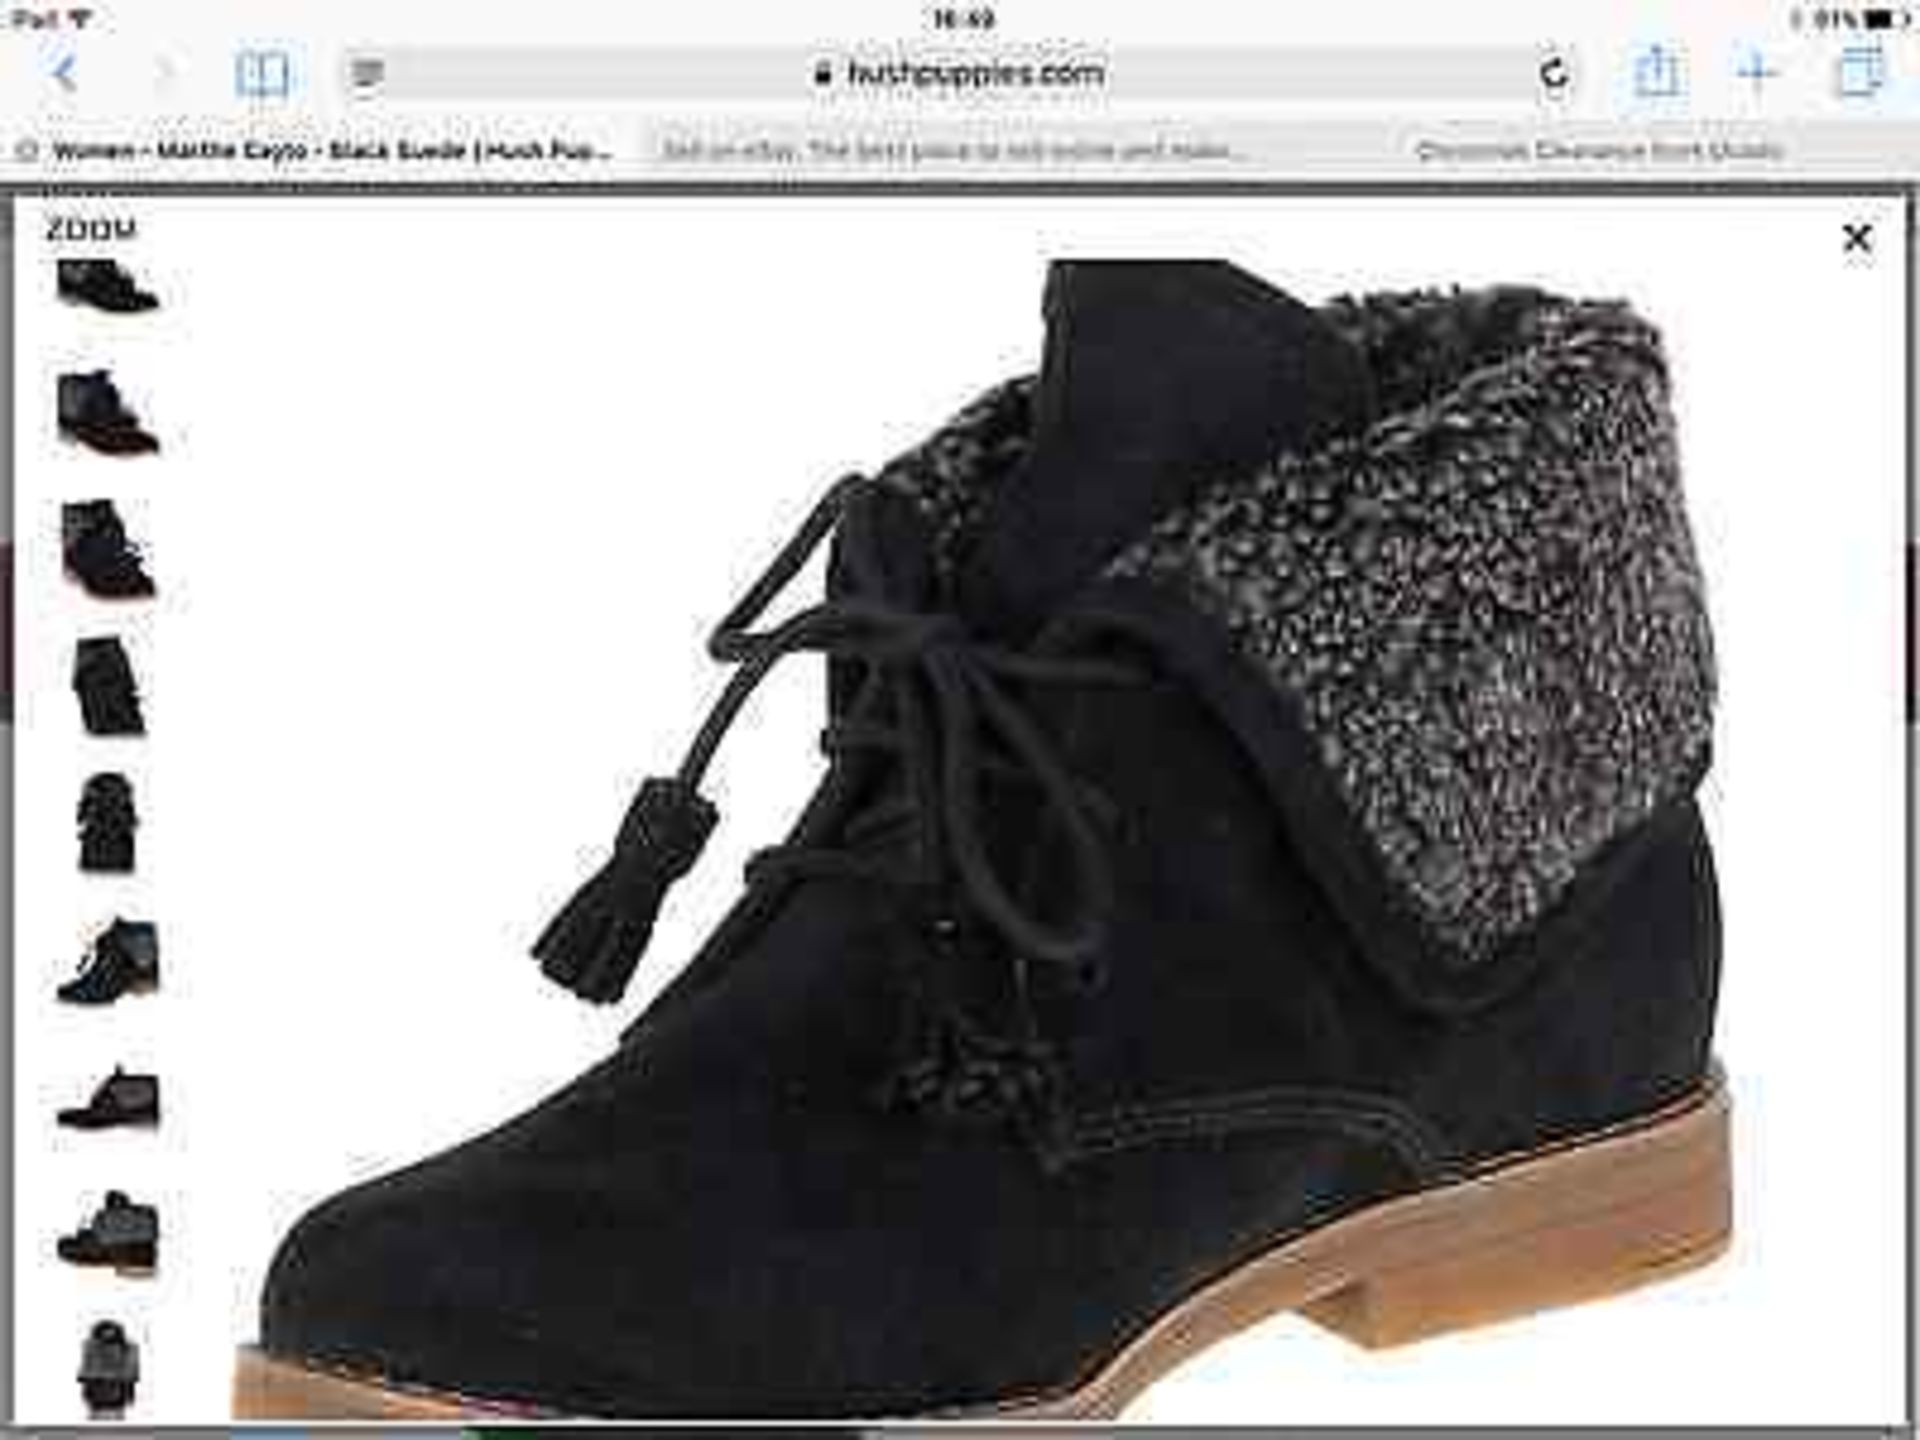 Hush Puppies Black Suede Martha Cayto Ankle Boot, Size UK 7, RRP £100 (New with box) - Image 7 of 12